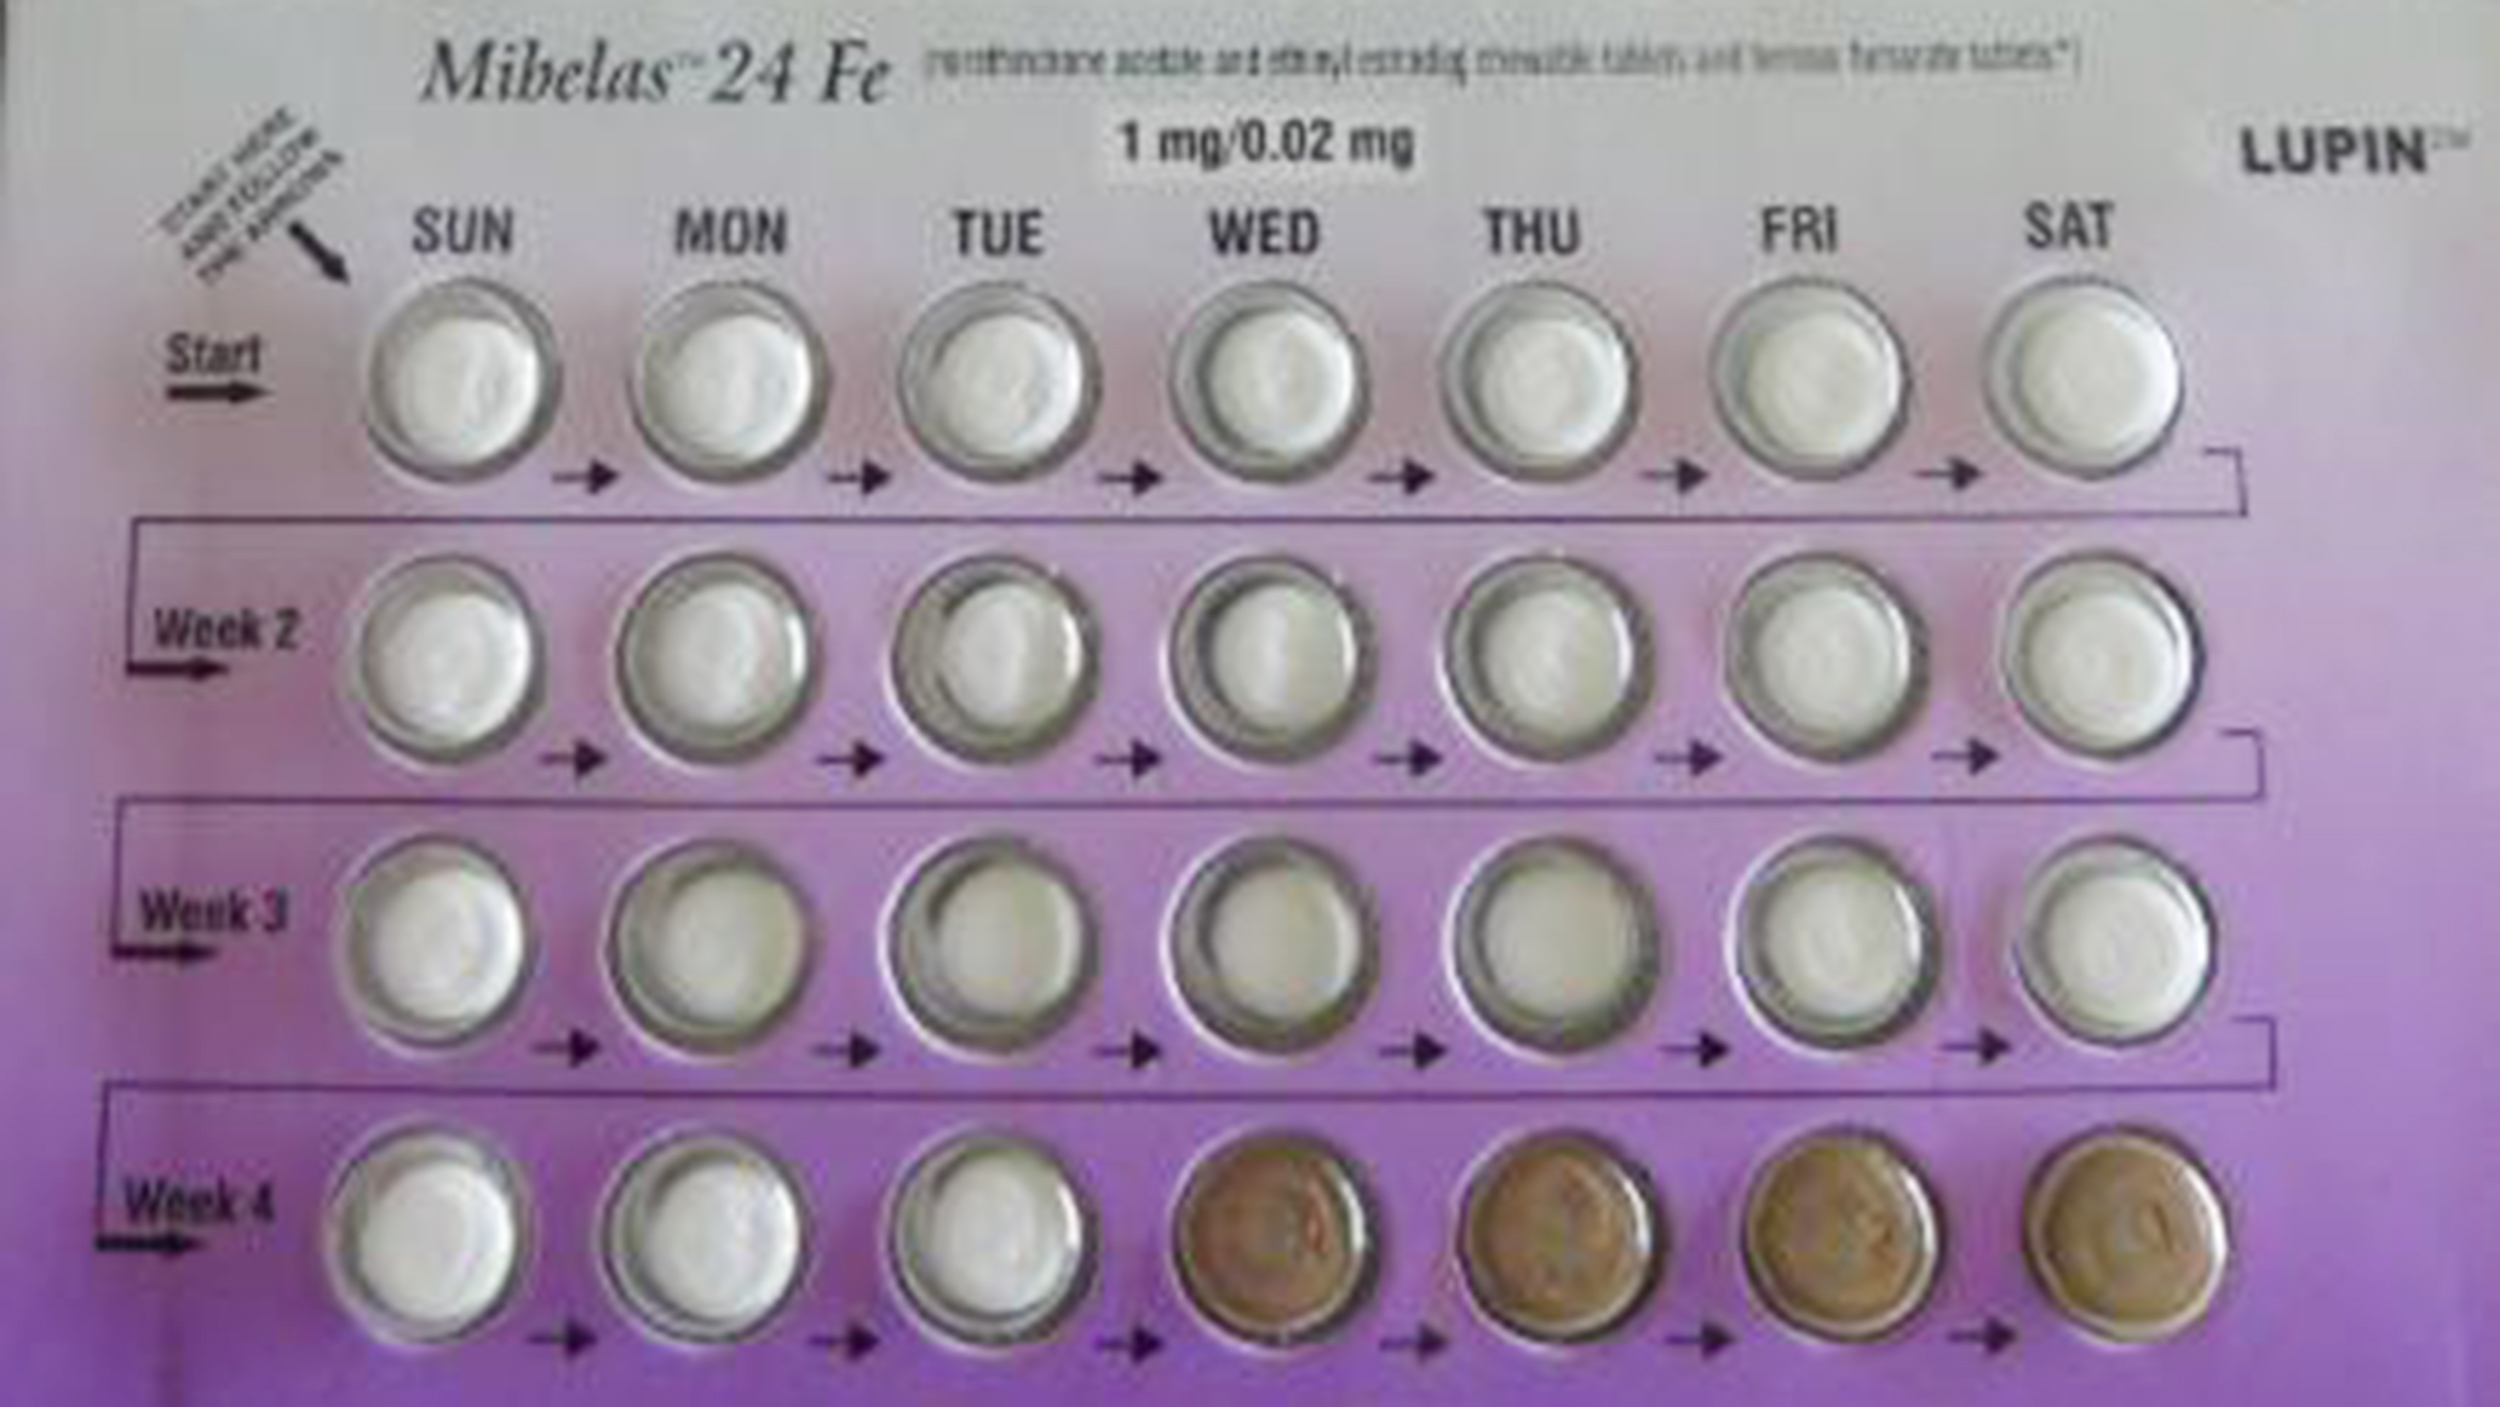 Birth control pills recalled due to packaging error